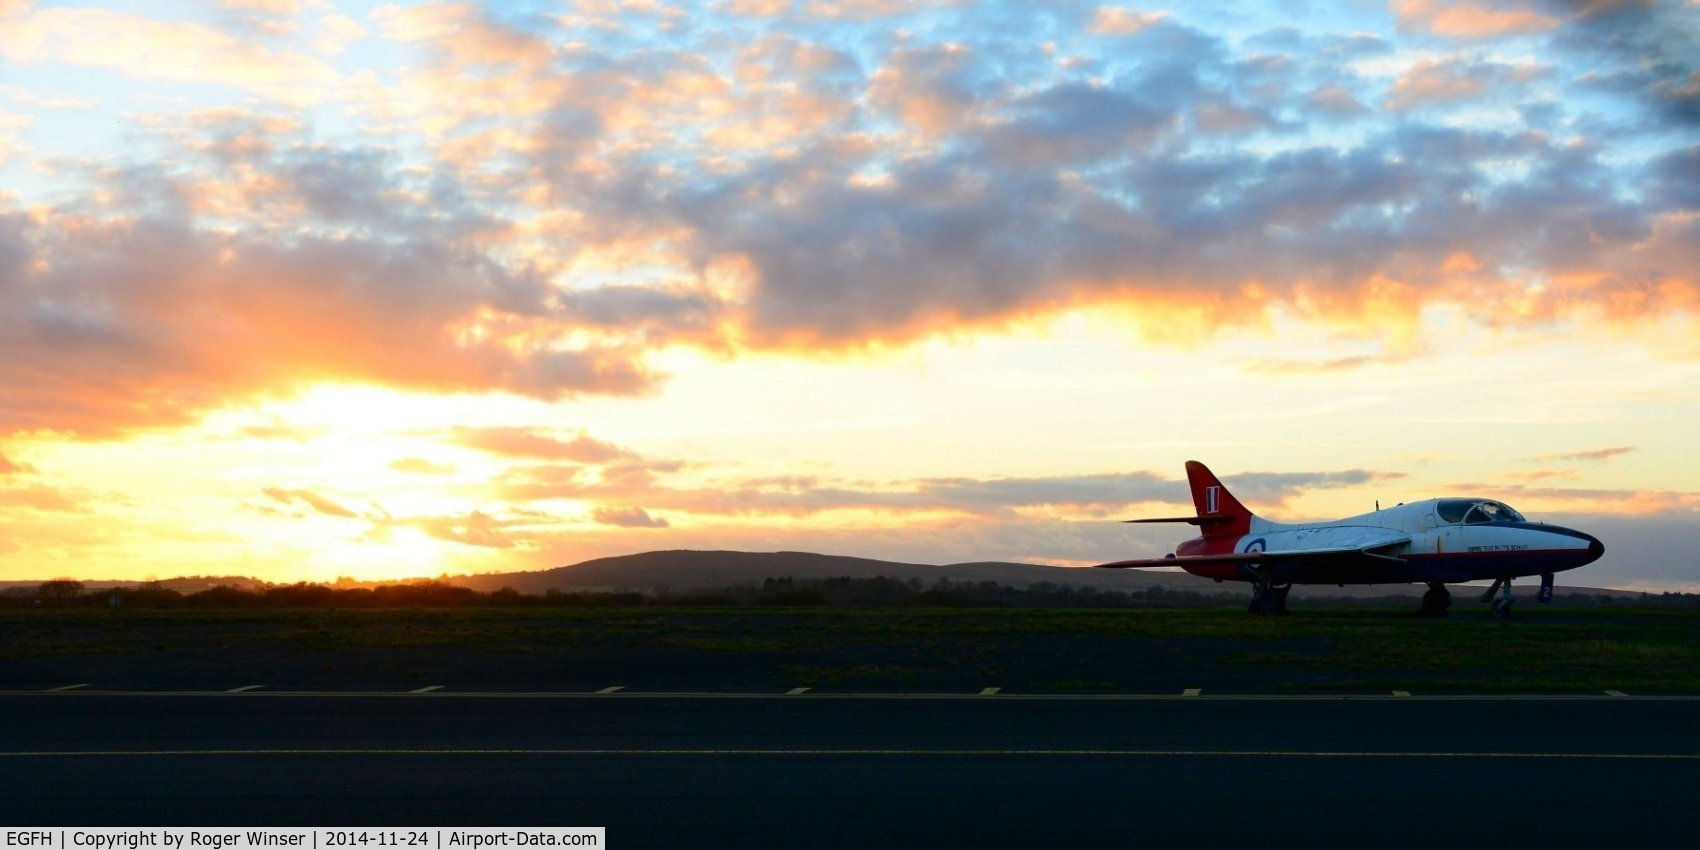 Swansea Airport, Swansea, Wales United Kingdom (EGFH) - Sunset seen from the airport.